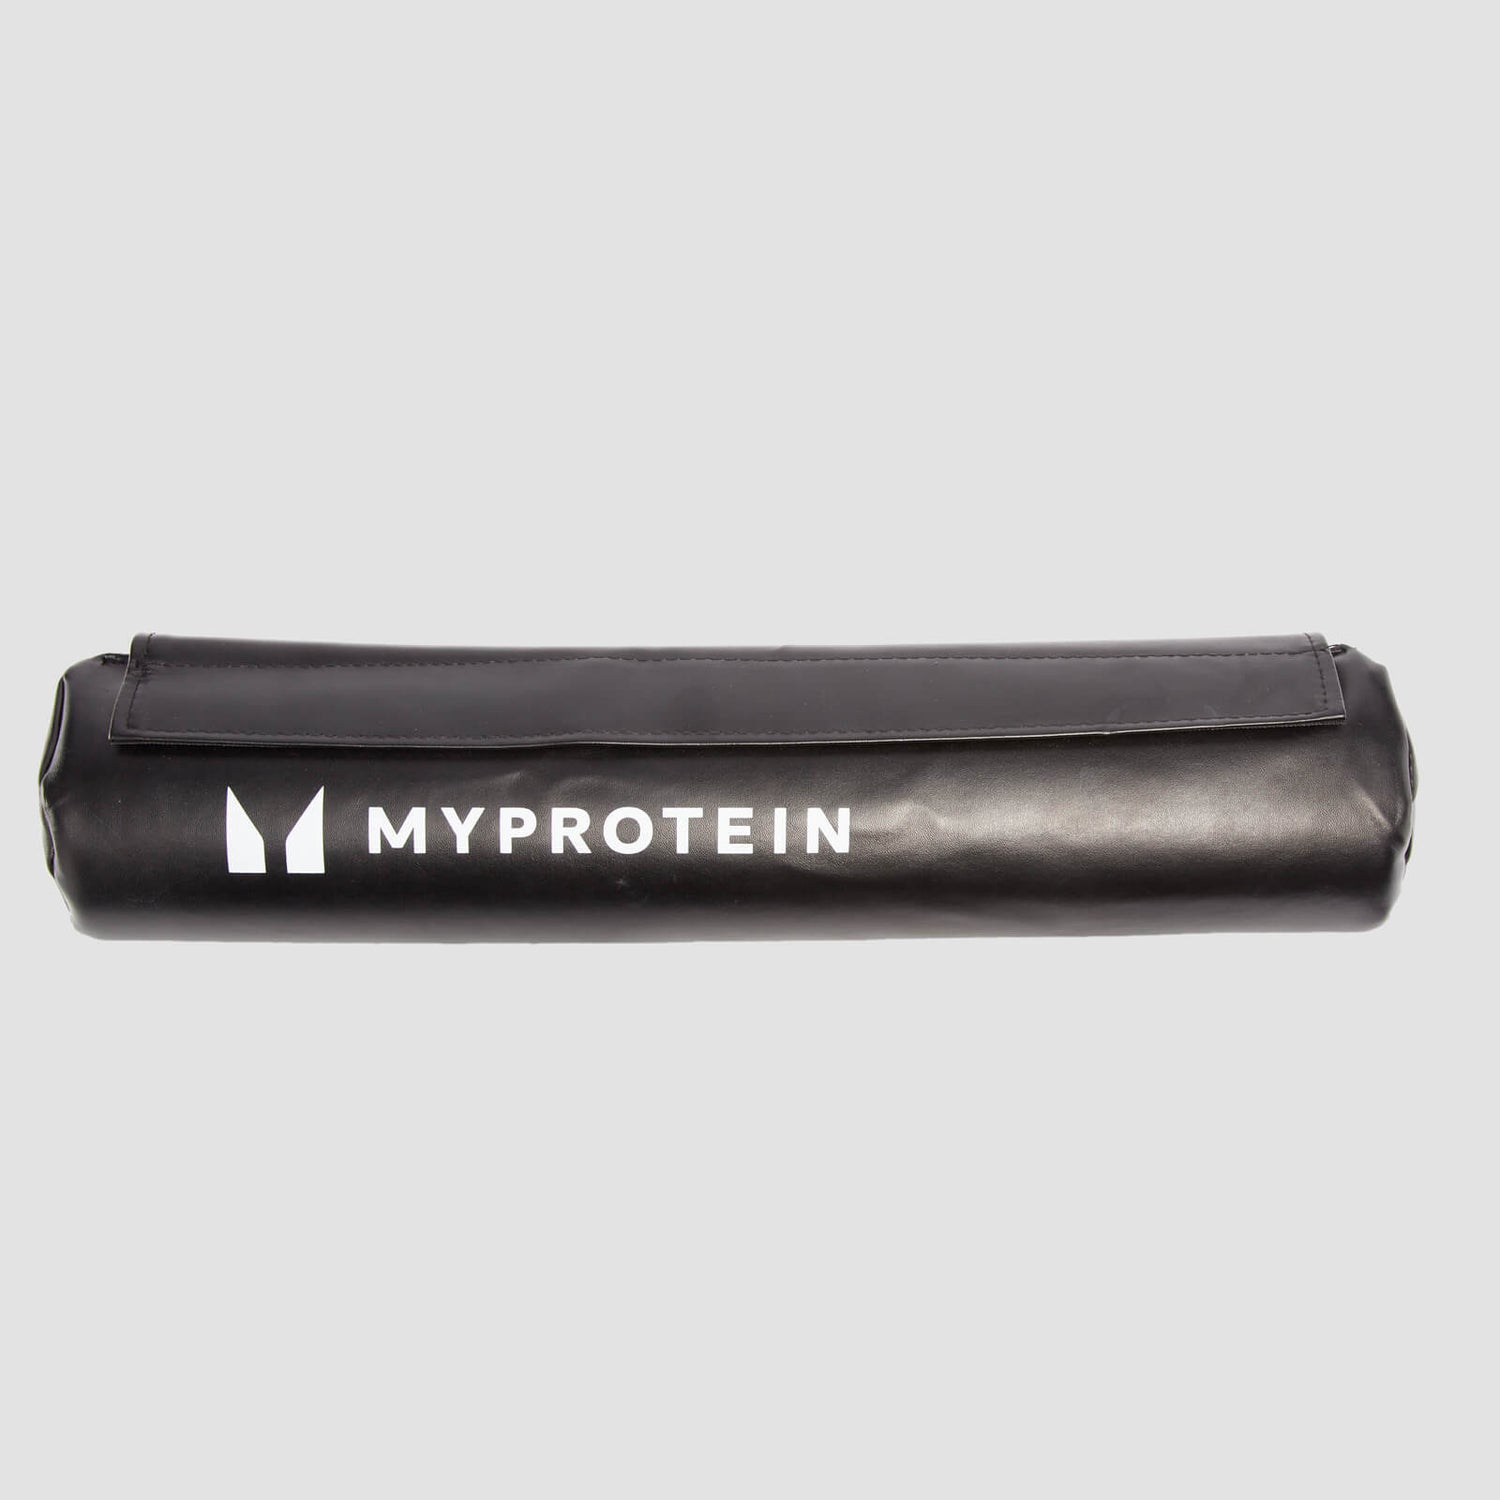 Myprotein Barbell Pad – Sort